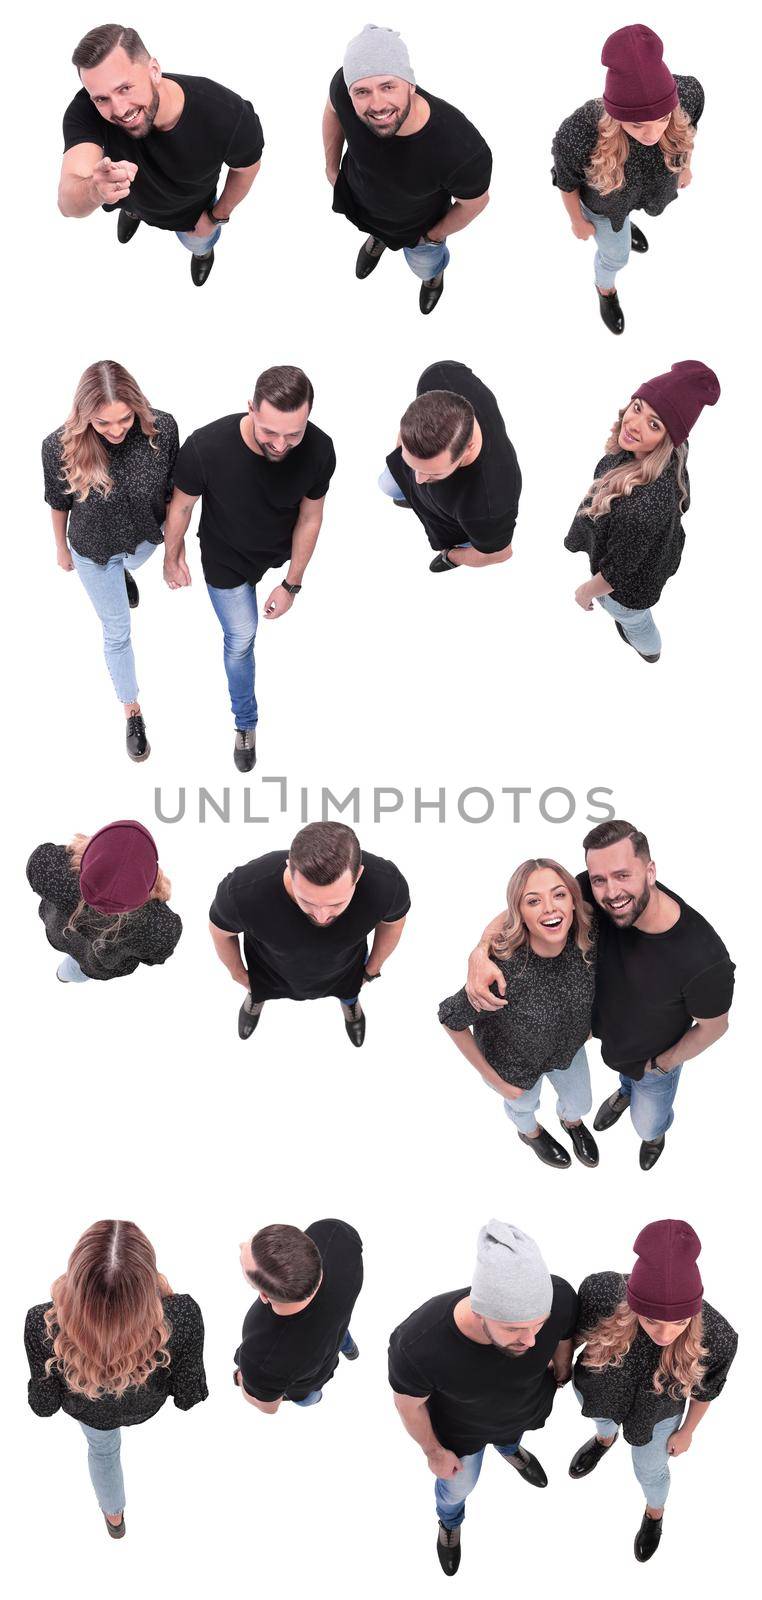 top view. image of modern different young people . isolated on a white background